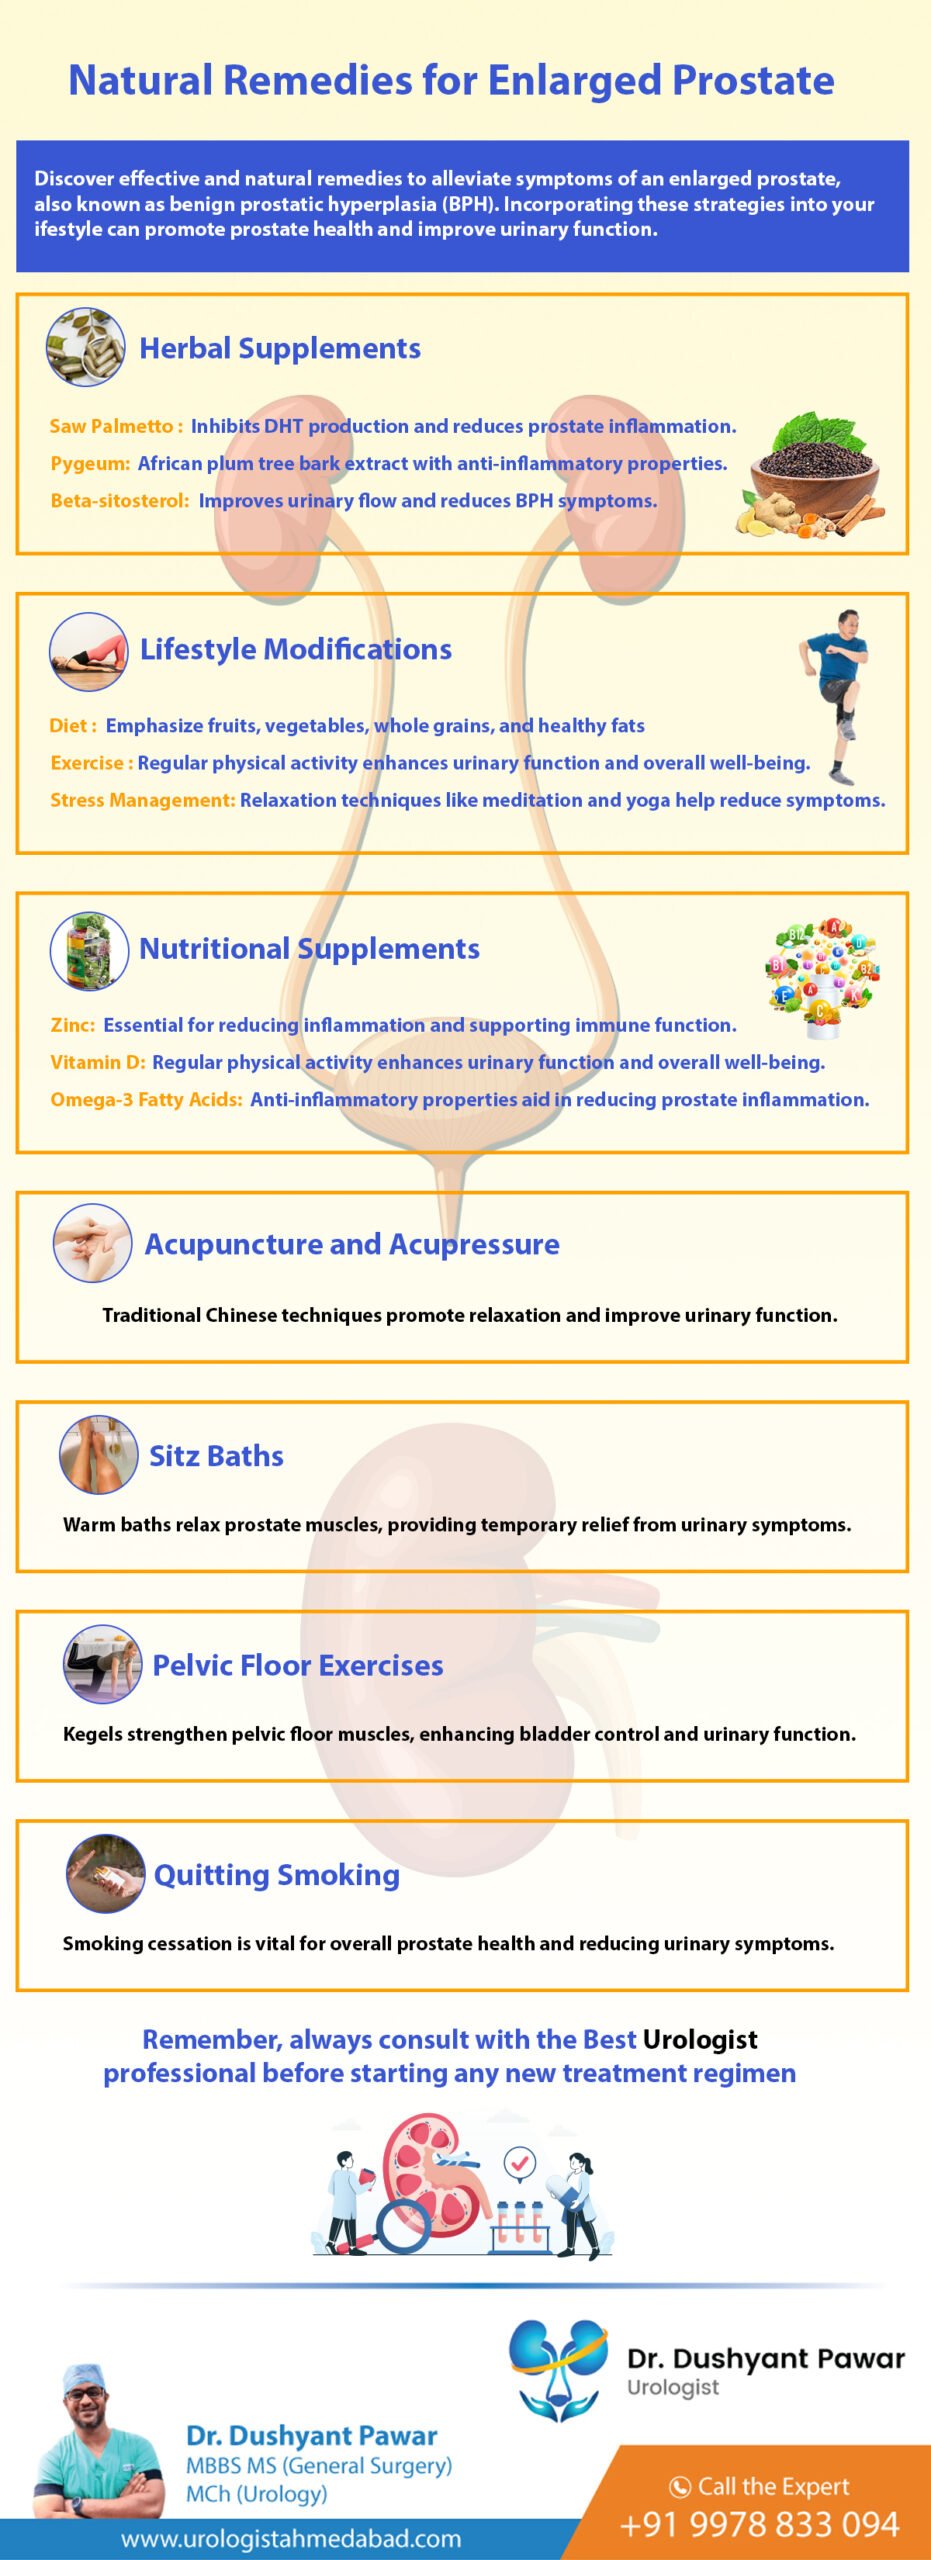 Image showcasing natural remedies for enhanced proteins, including herbal supplements, lifestyle modifications, nutritional supplements, acupuncture, sitz baths, pelvic floor exercises, and quitting smoking